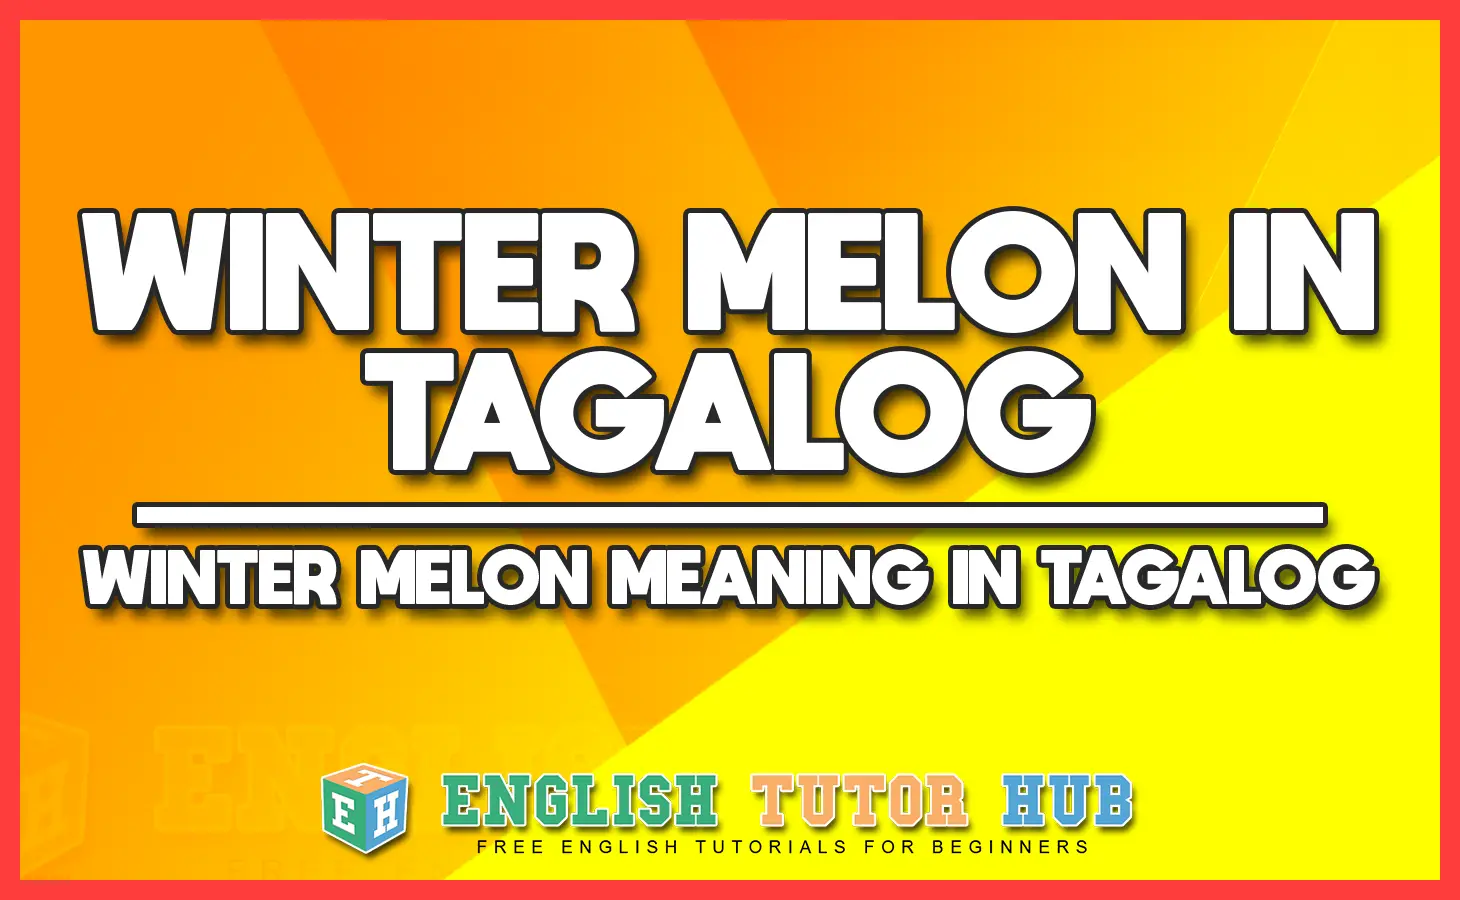 Winter Melon in Tagalog - Winter Melon Meaning in Tagalog